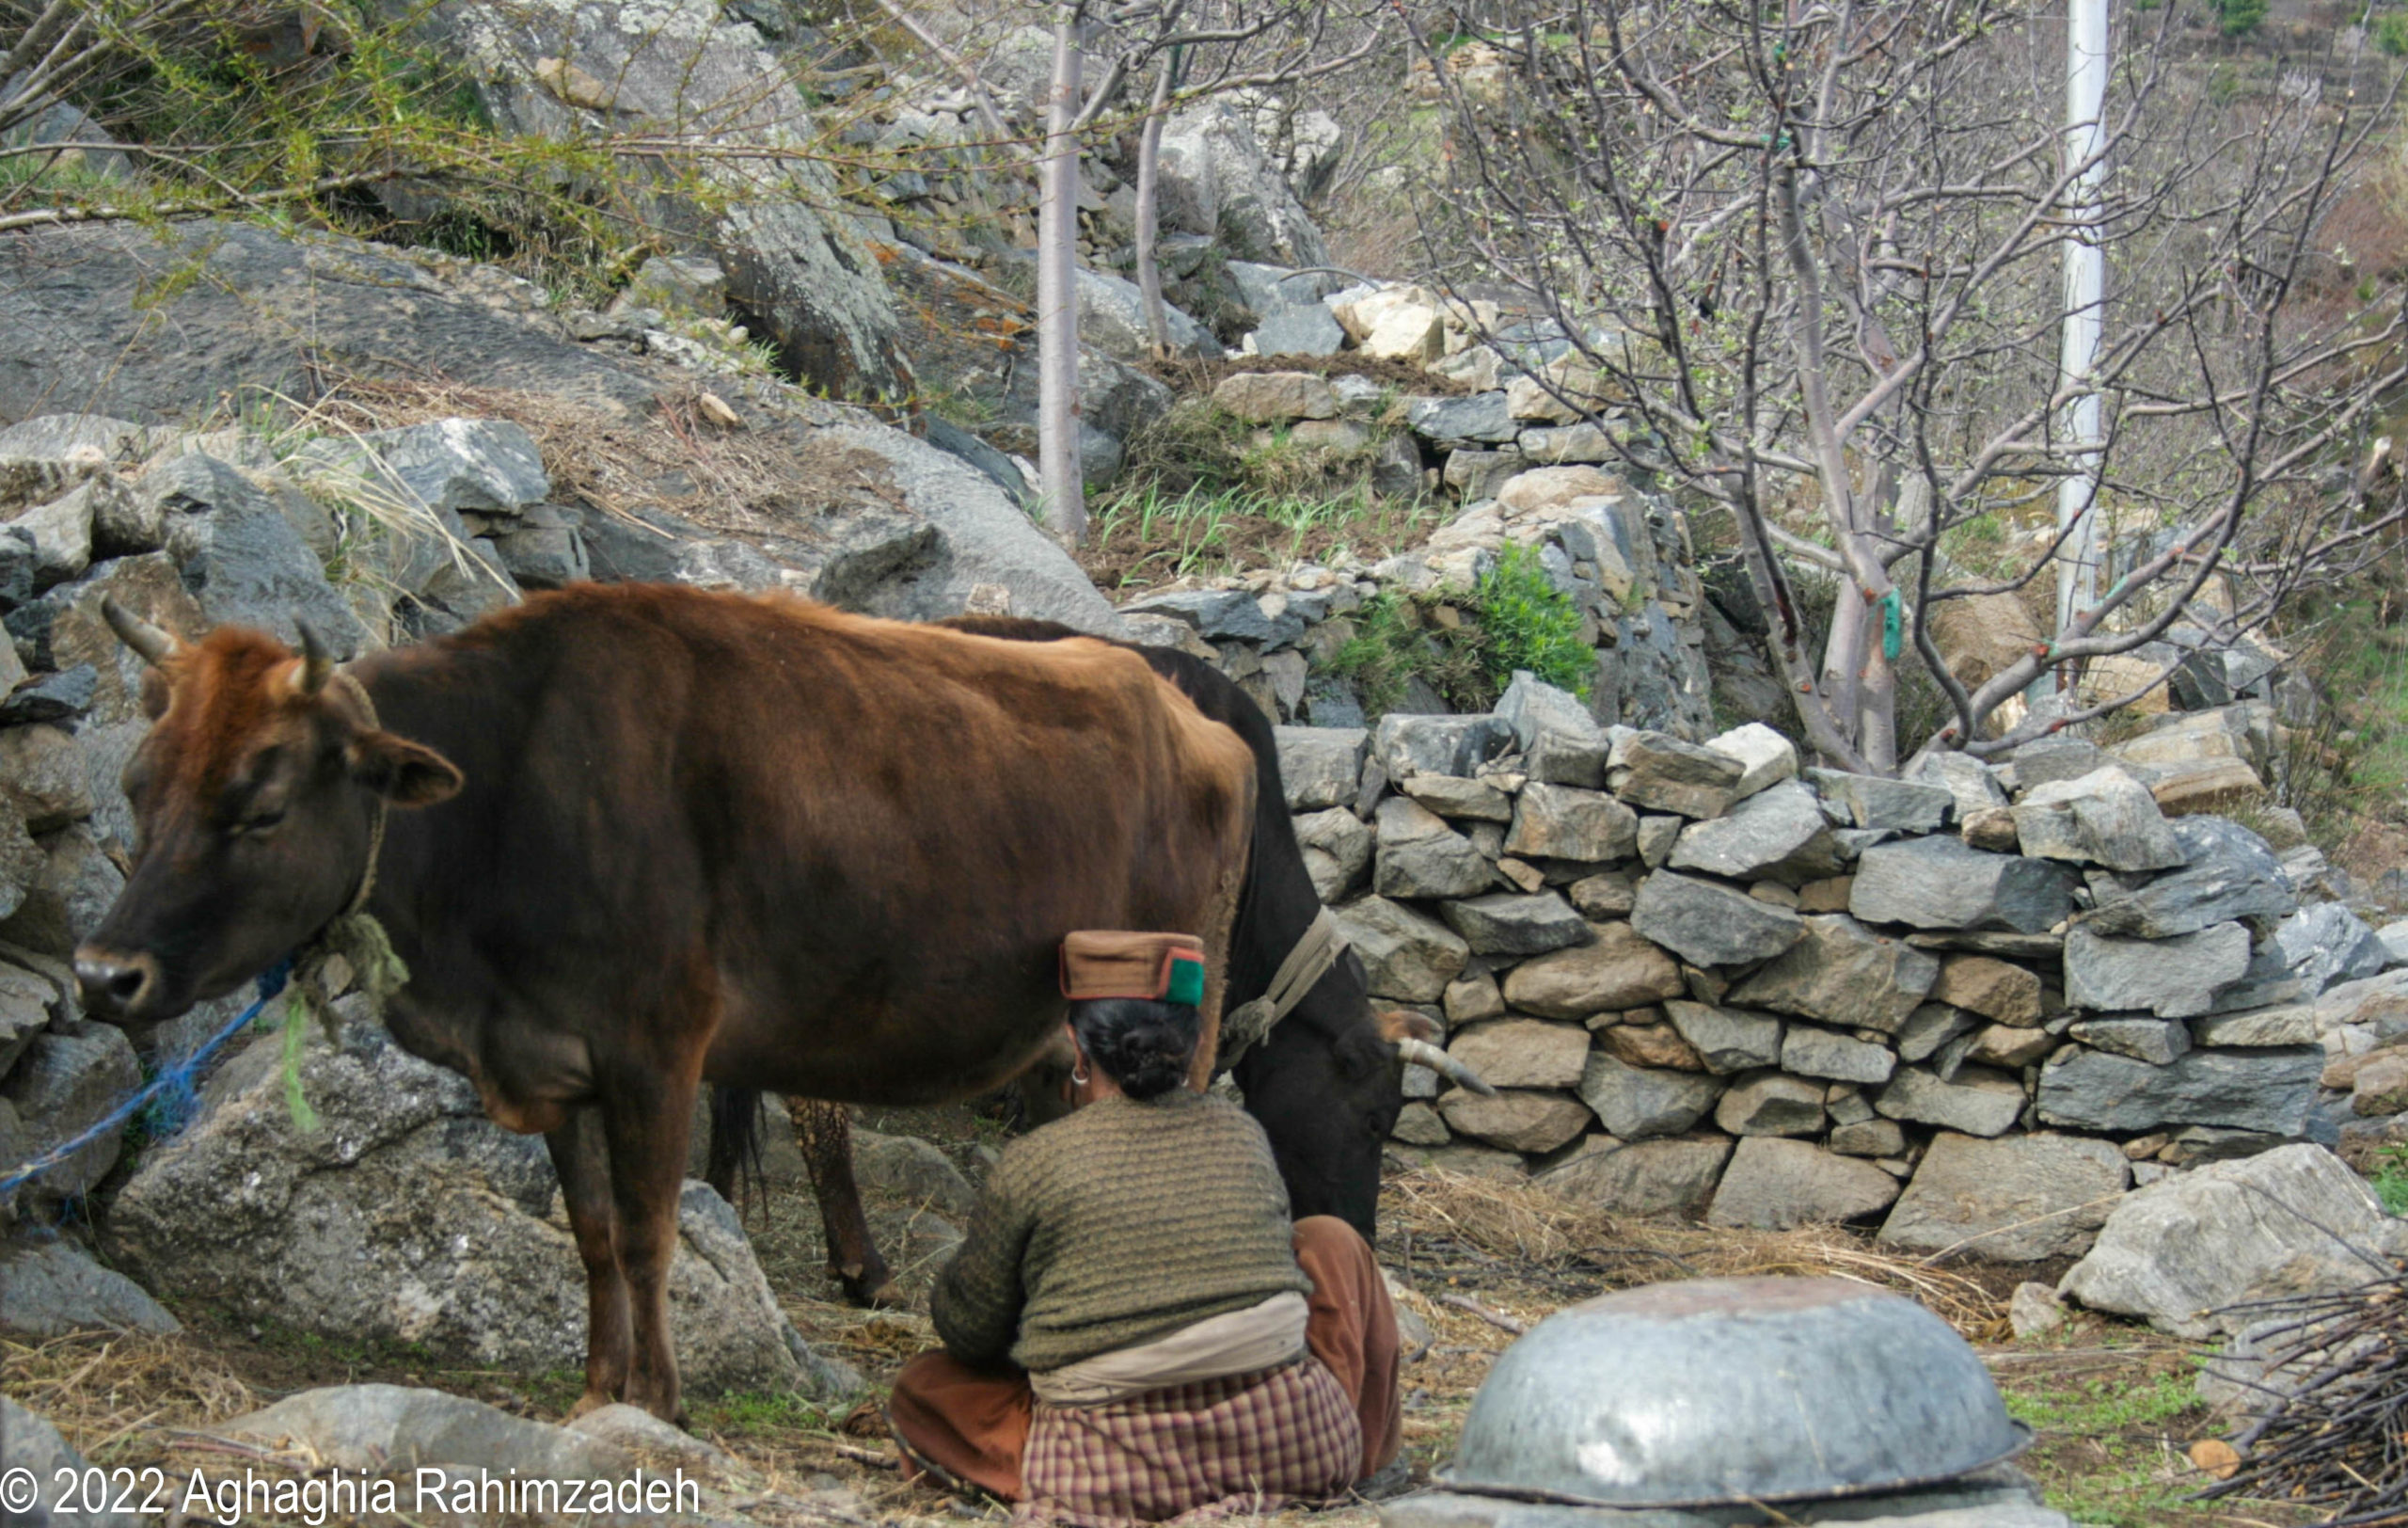 A seated woman hand milks a cow outside.